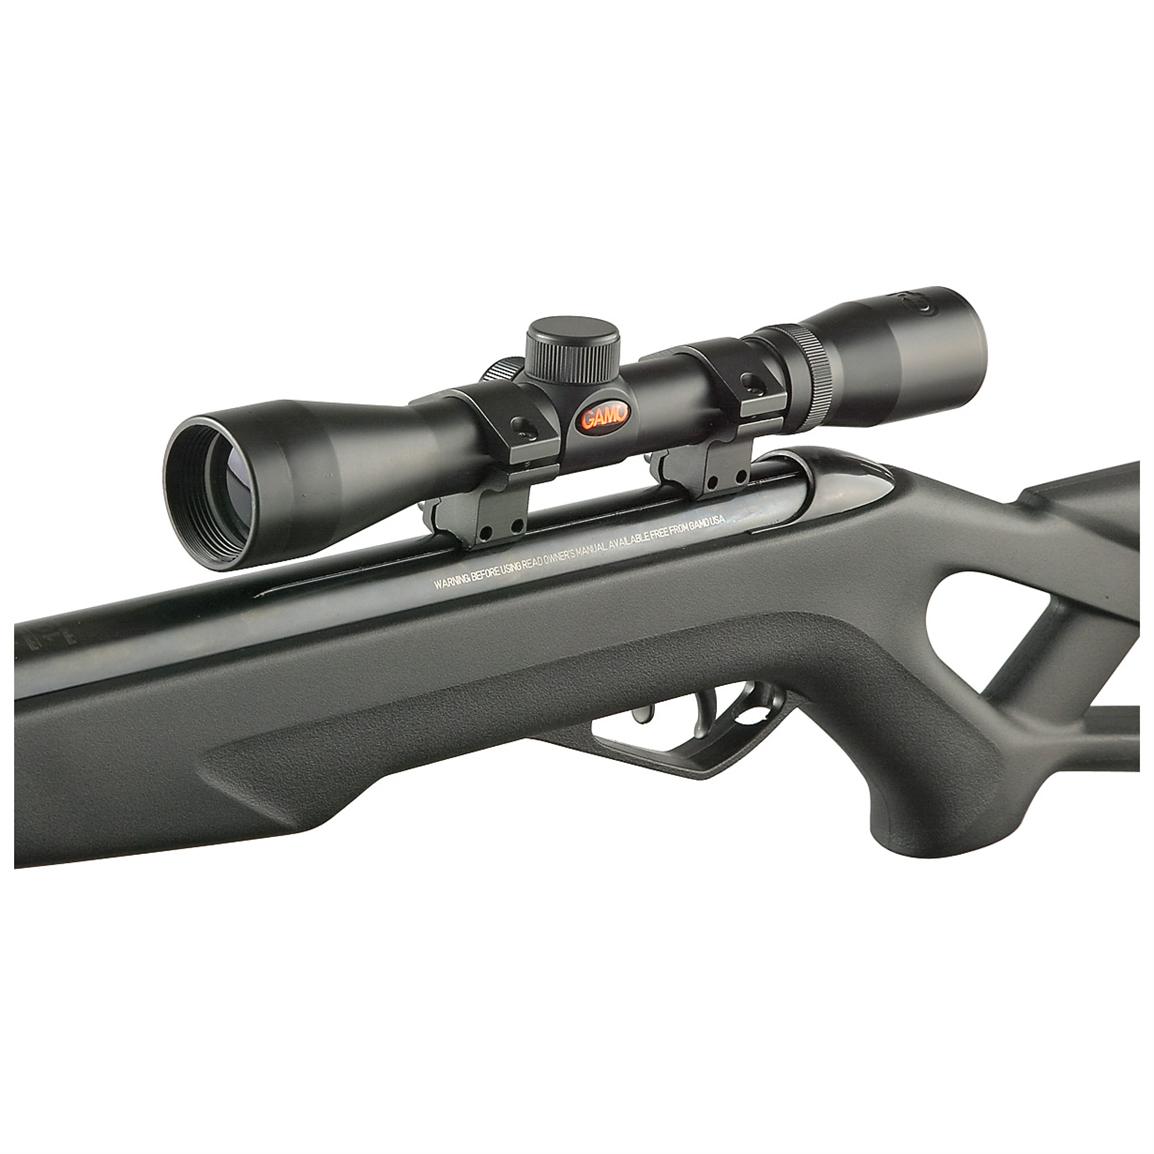 gamo-4x32-mm-air-rifle-scope-163974-rifle-scopes-and-accessories-at